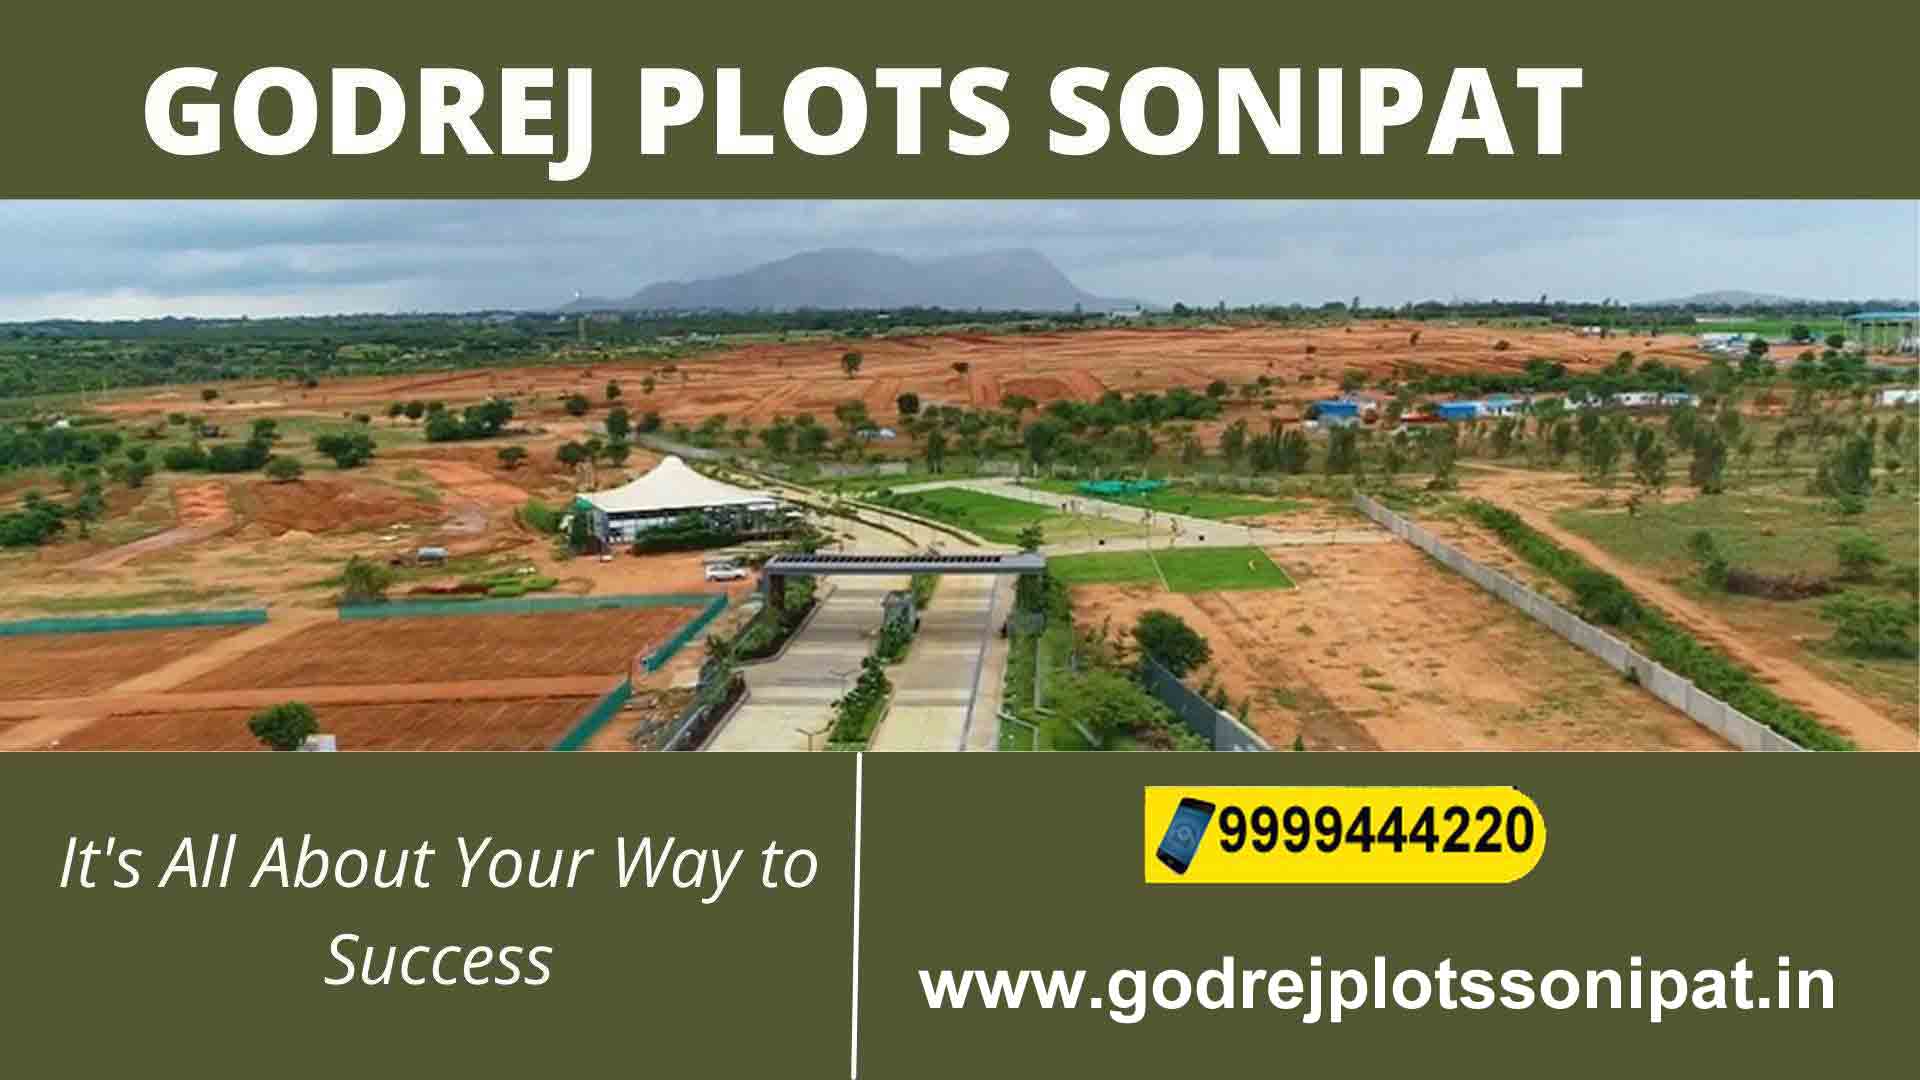 Godrej Plots Sonipat Adding Home Building Experience of Own